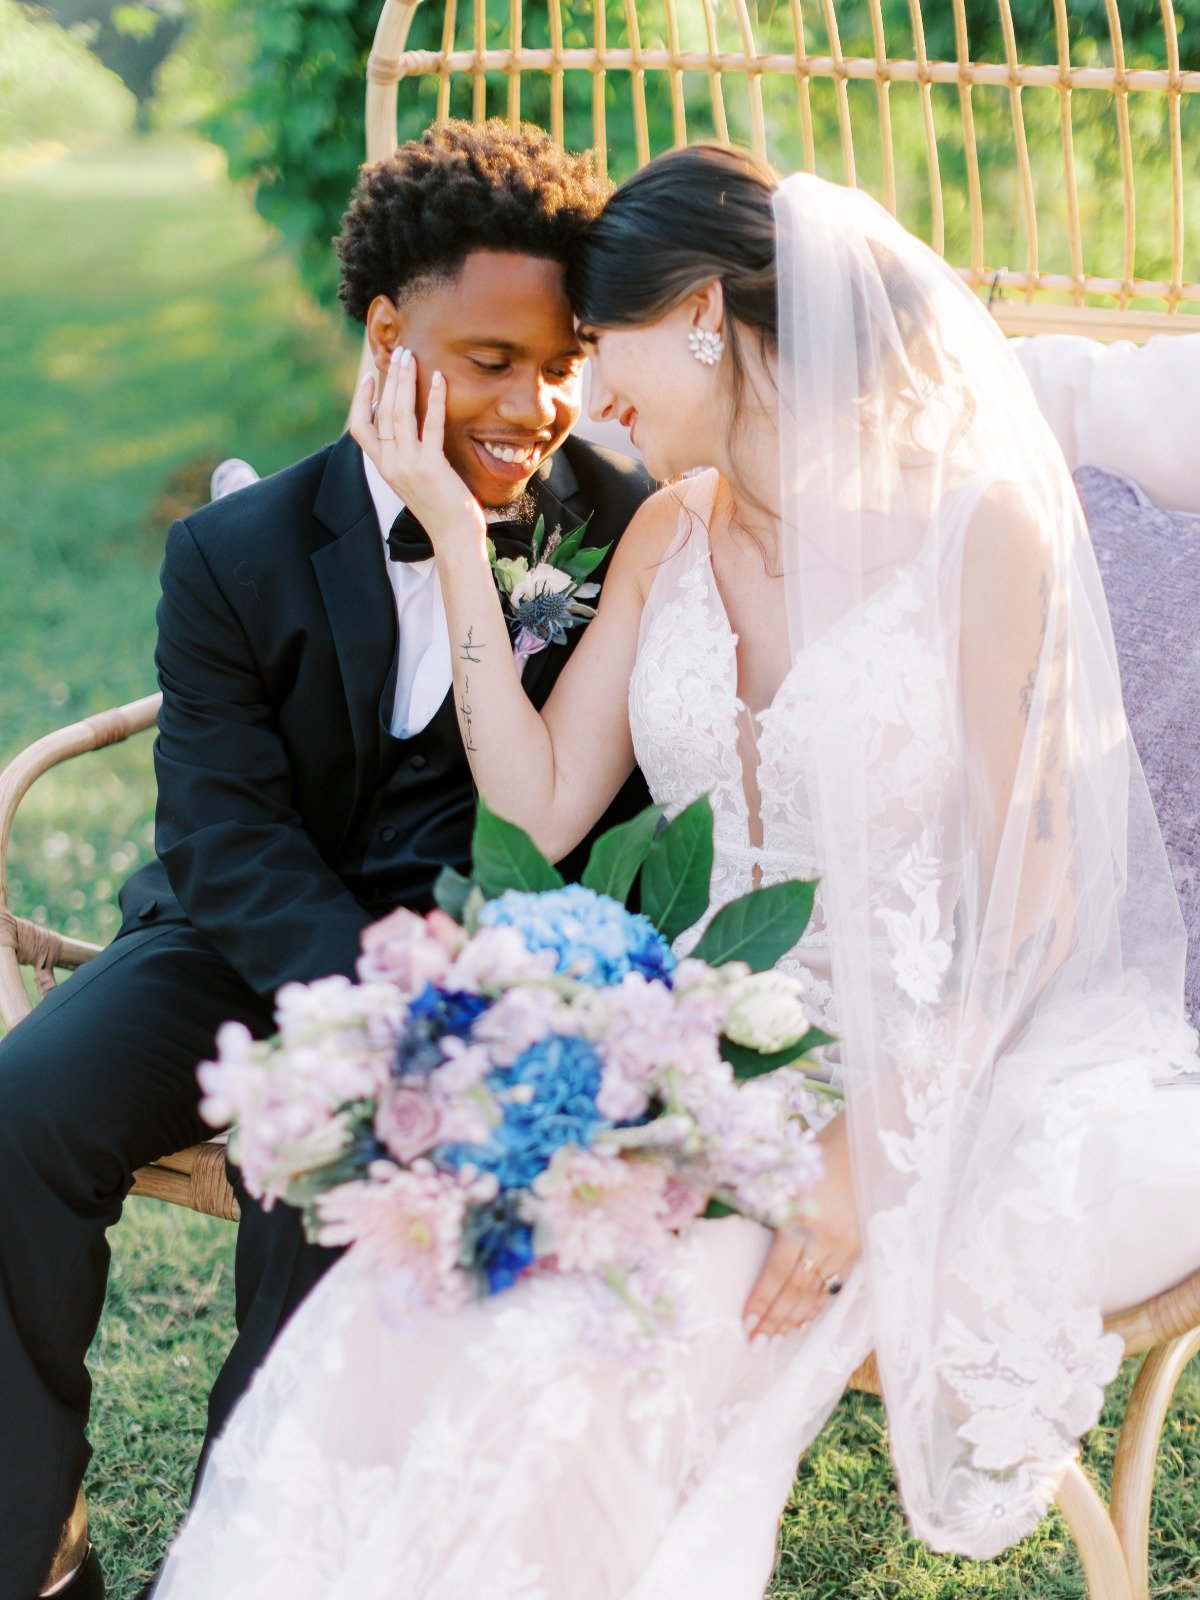 This Wedding Inspiration Shoot Is A Foodie's Dream